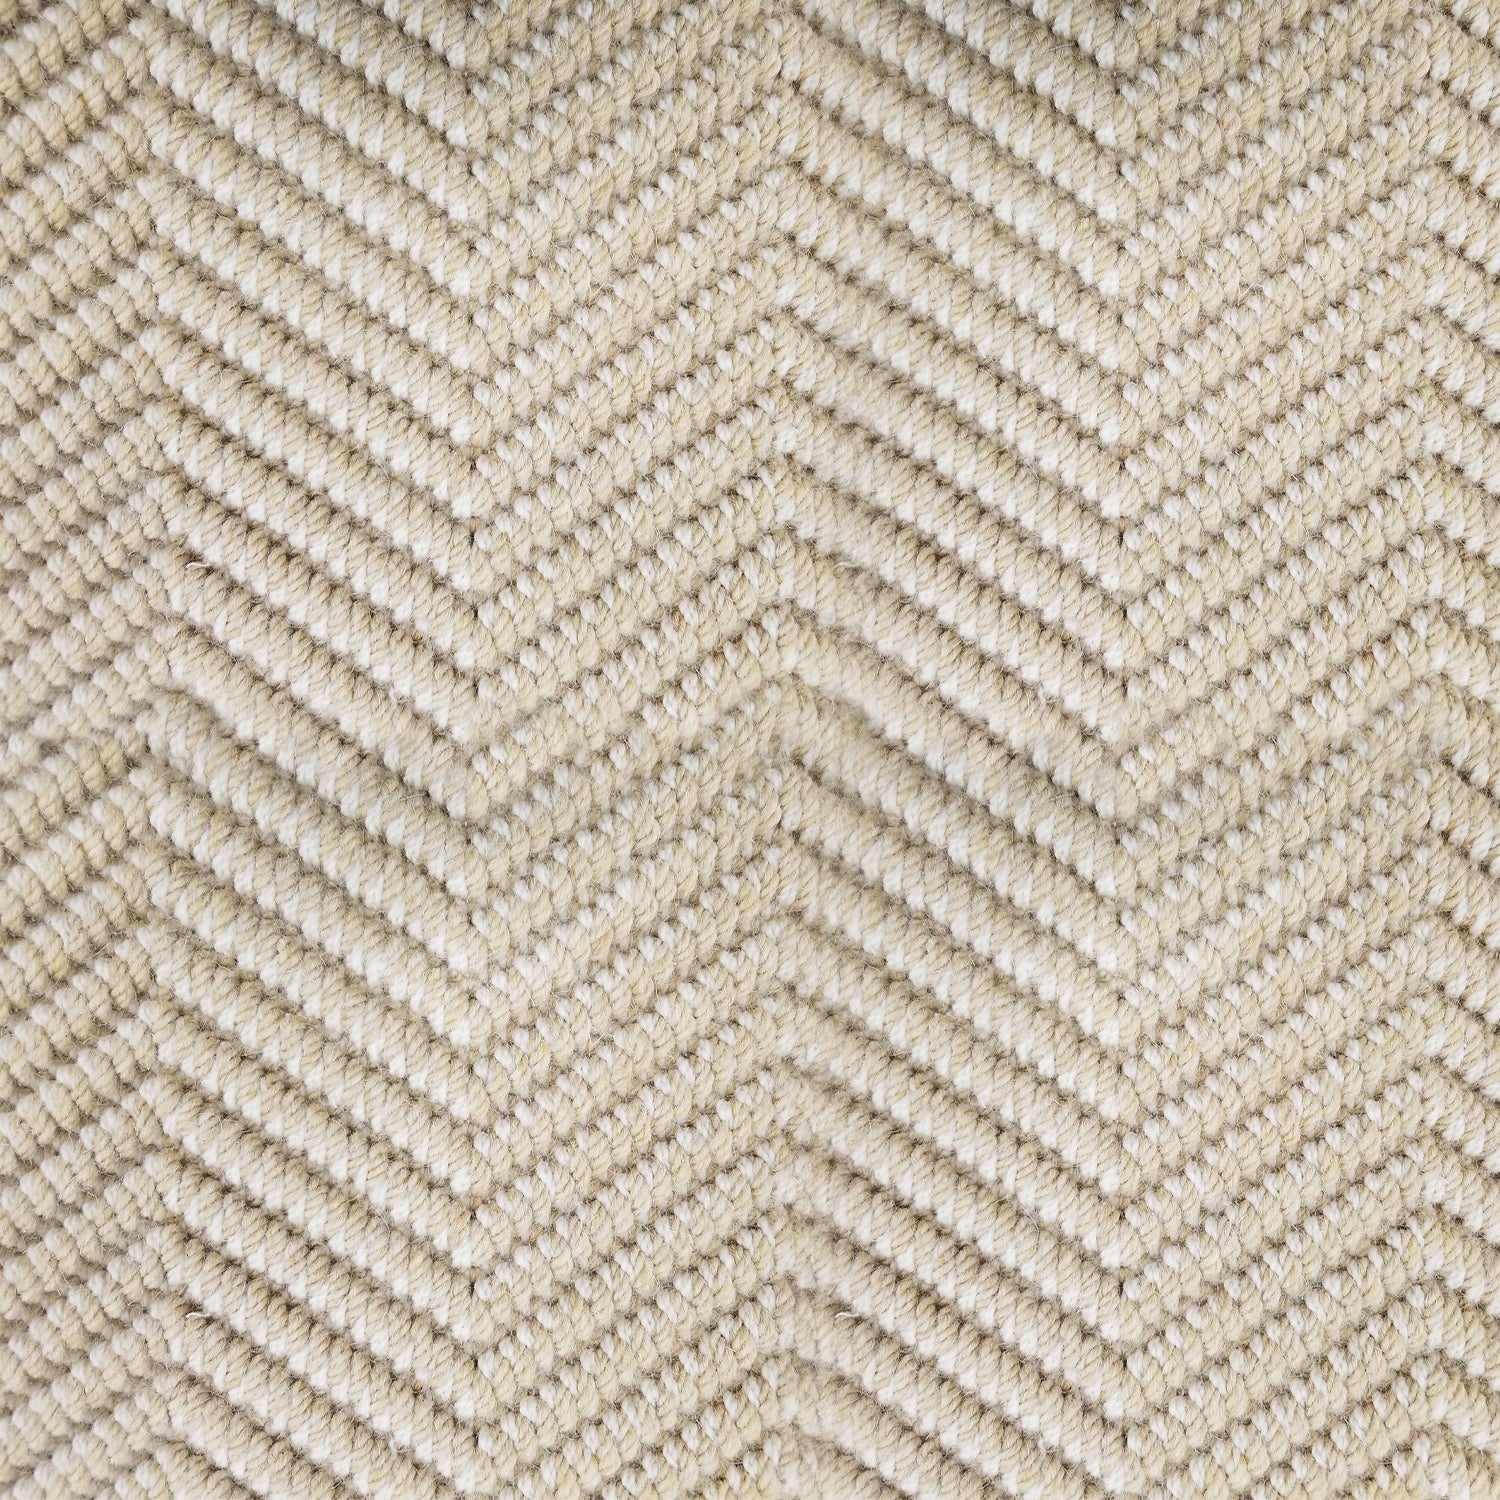 Wool broadloom carpet swatch in a dimensional chevron weave in a light gold colorway.